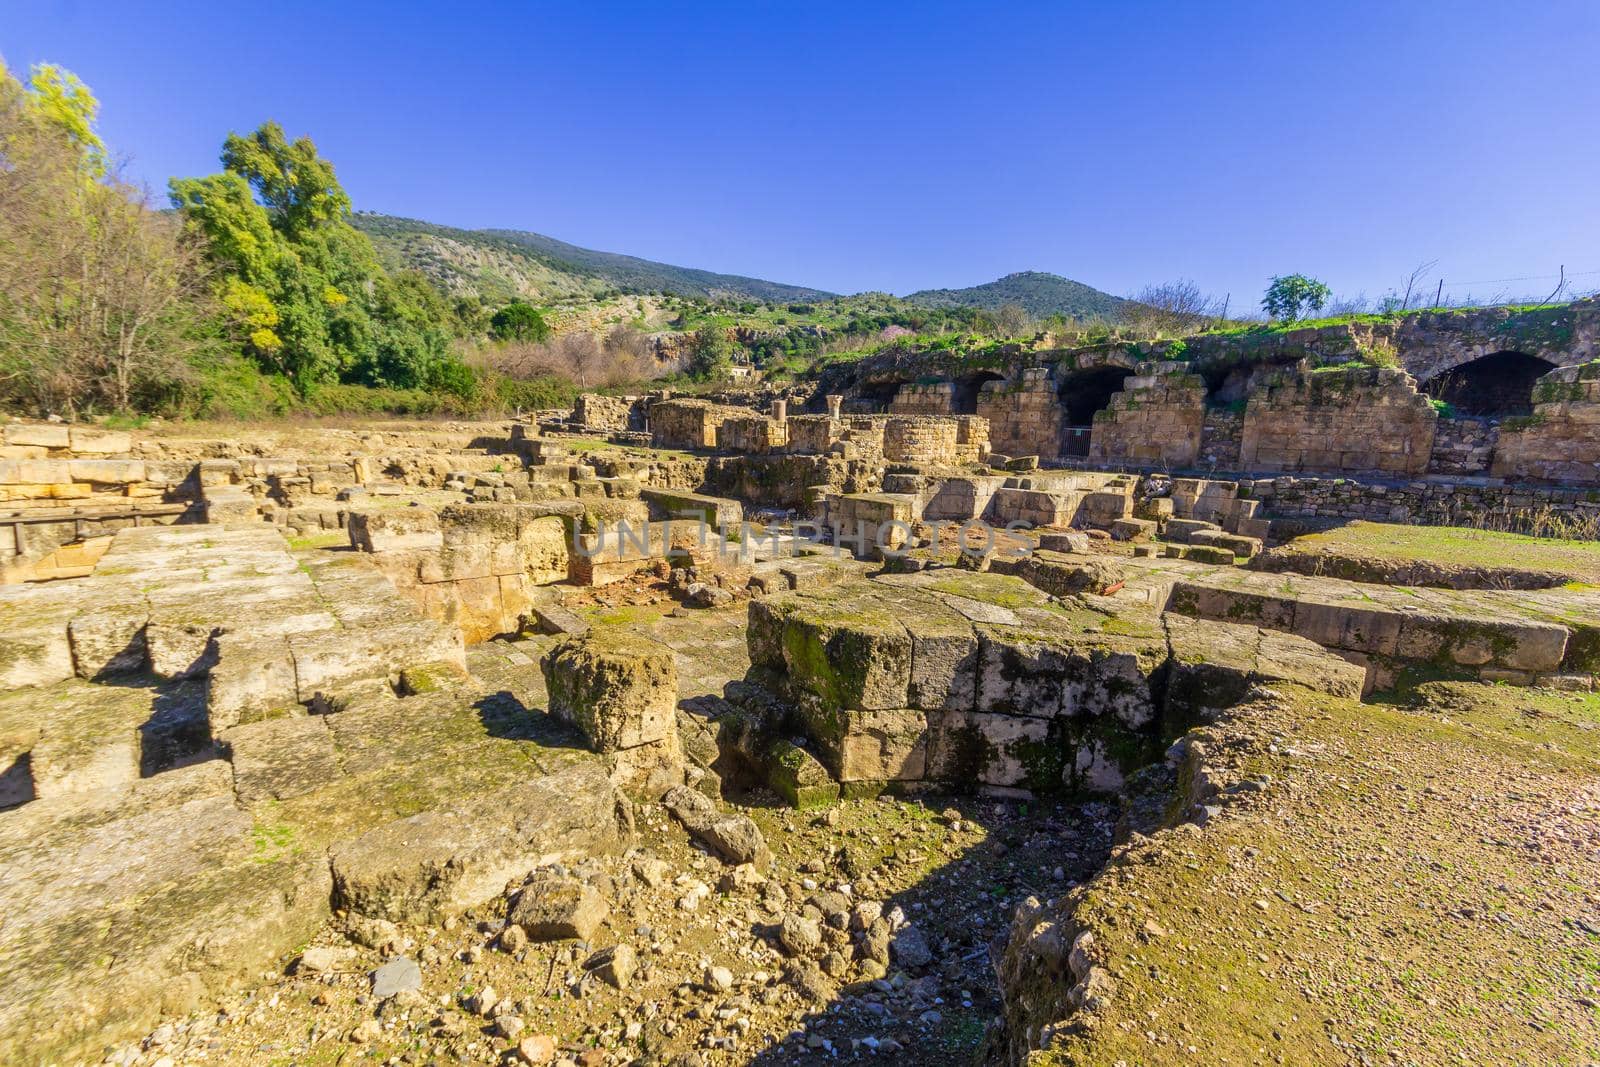 View of the remains of the palace of Agrippas II, in the Hermon Stream (Banias) Nature Reserve, Upper Galilee, Northern Israel